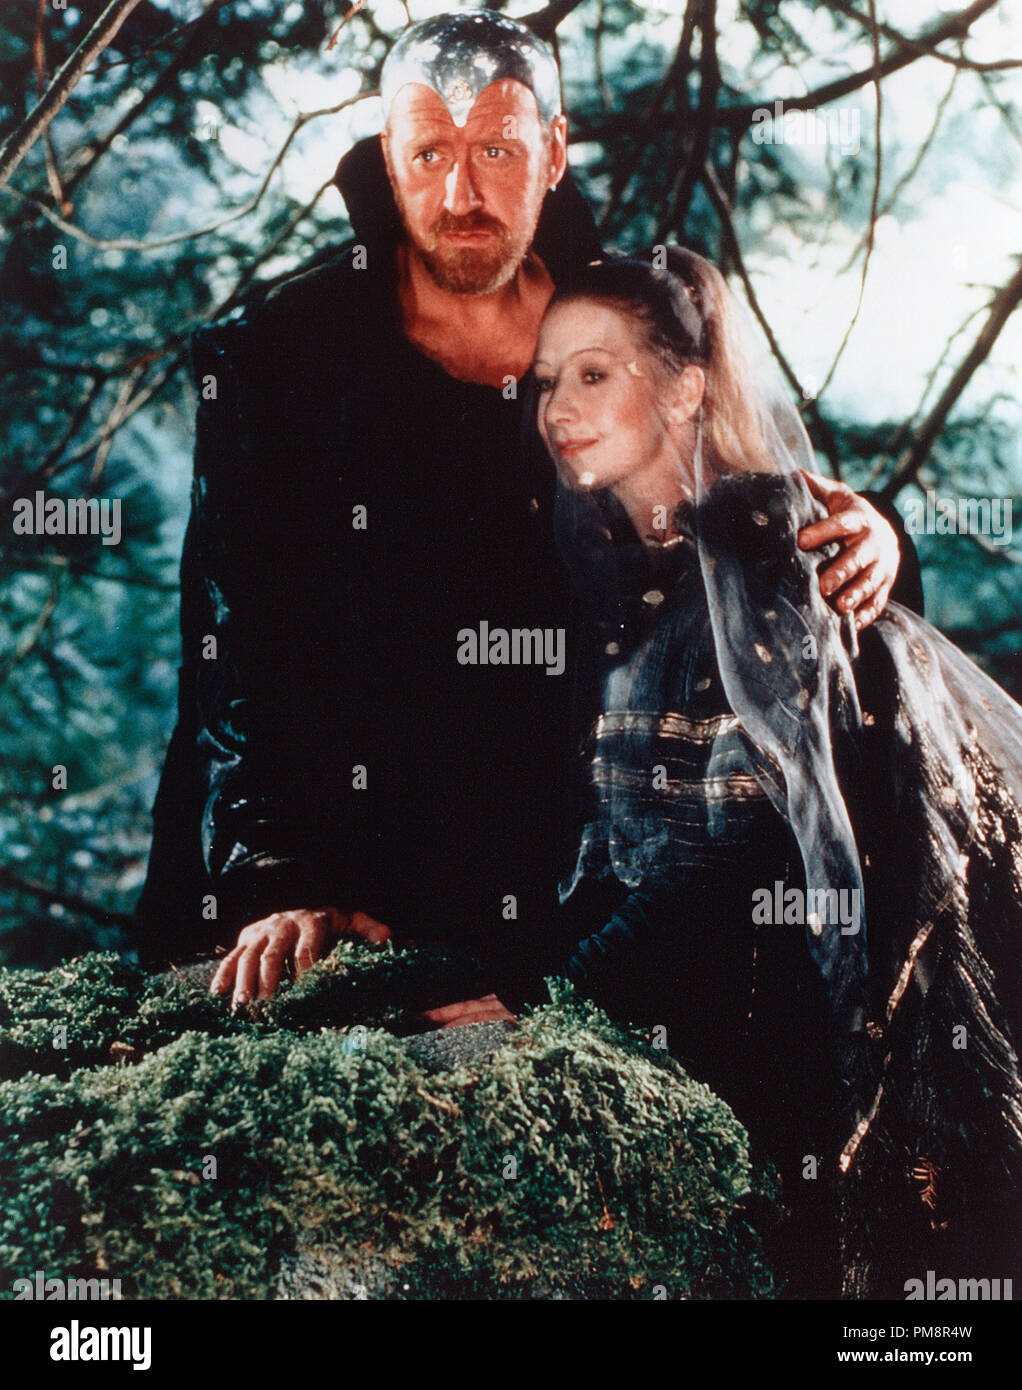 Studio Publicity Still from 'Excalibur' Nicol Williamson, Helen Mirren © 1981 Warner All Rights Reserved   File Reference # 31713149THA  For Editorial Use Only Stock Photo